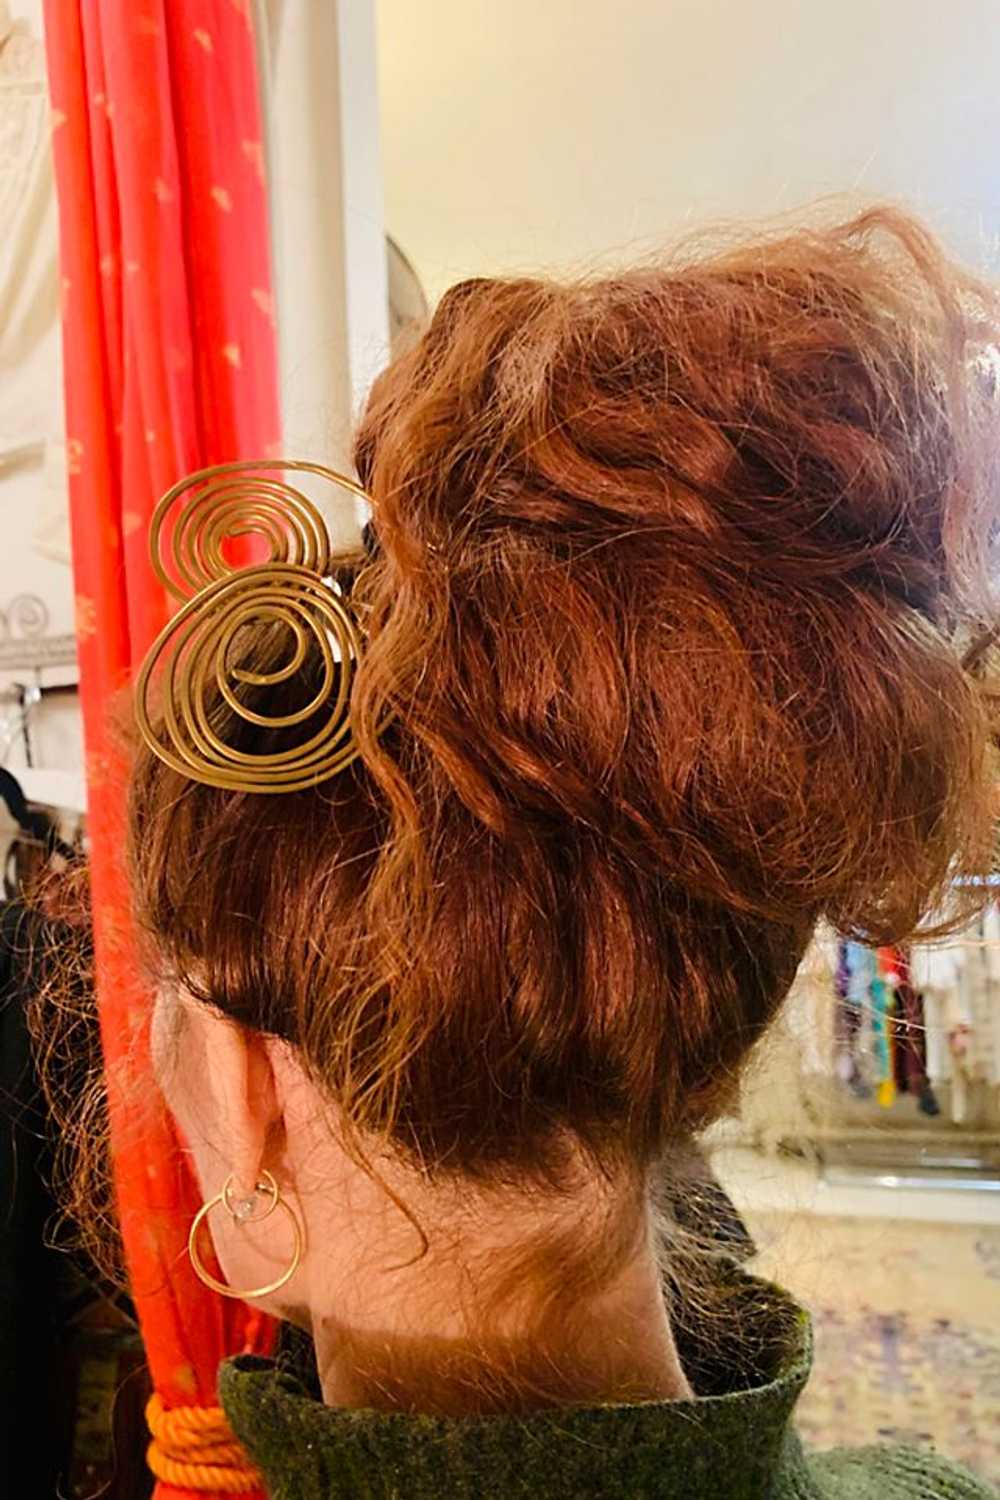 Early Aughts Hair Pin by Designer Sonia Boyajian … - image 2